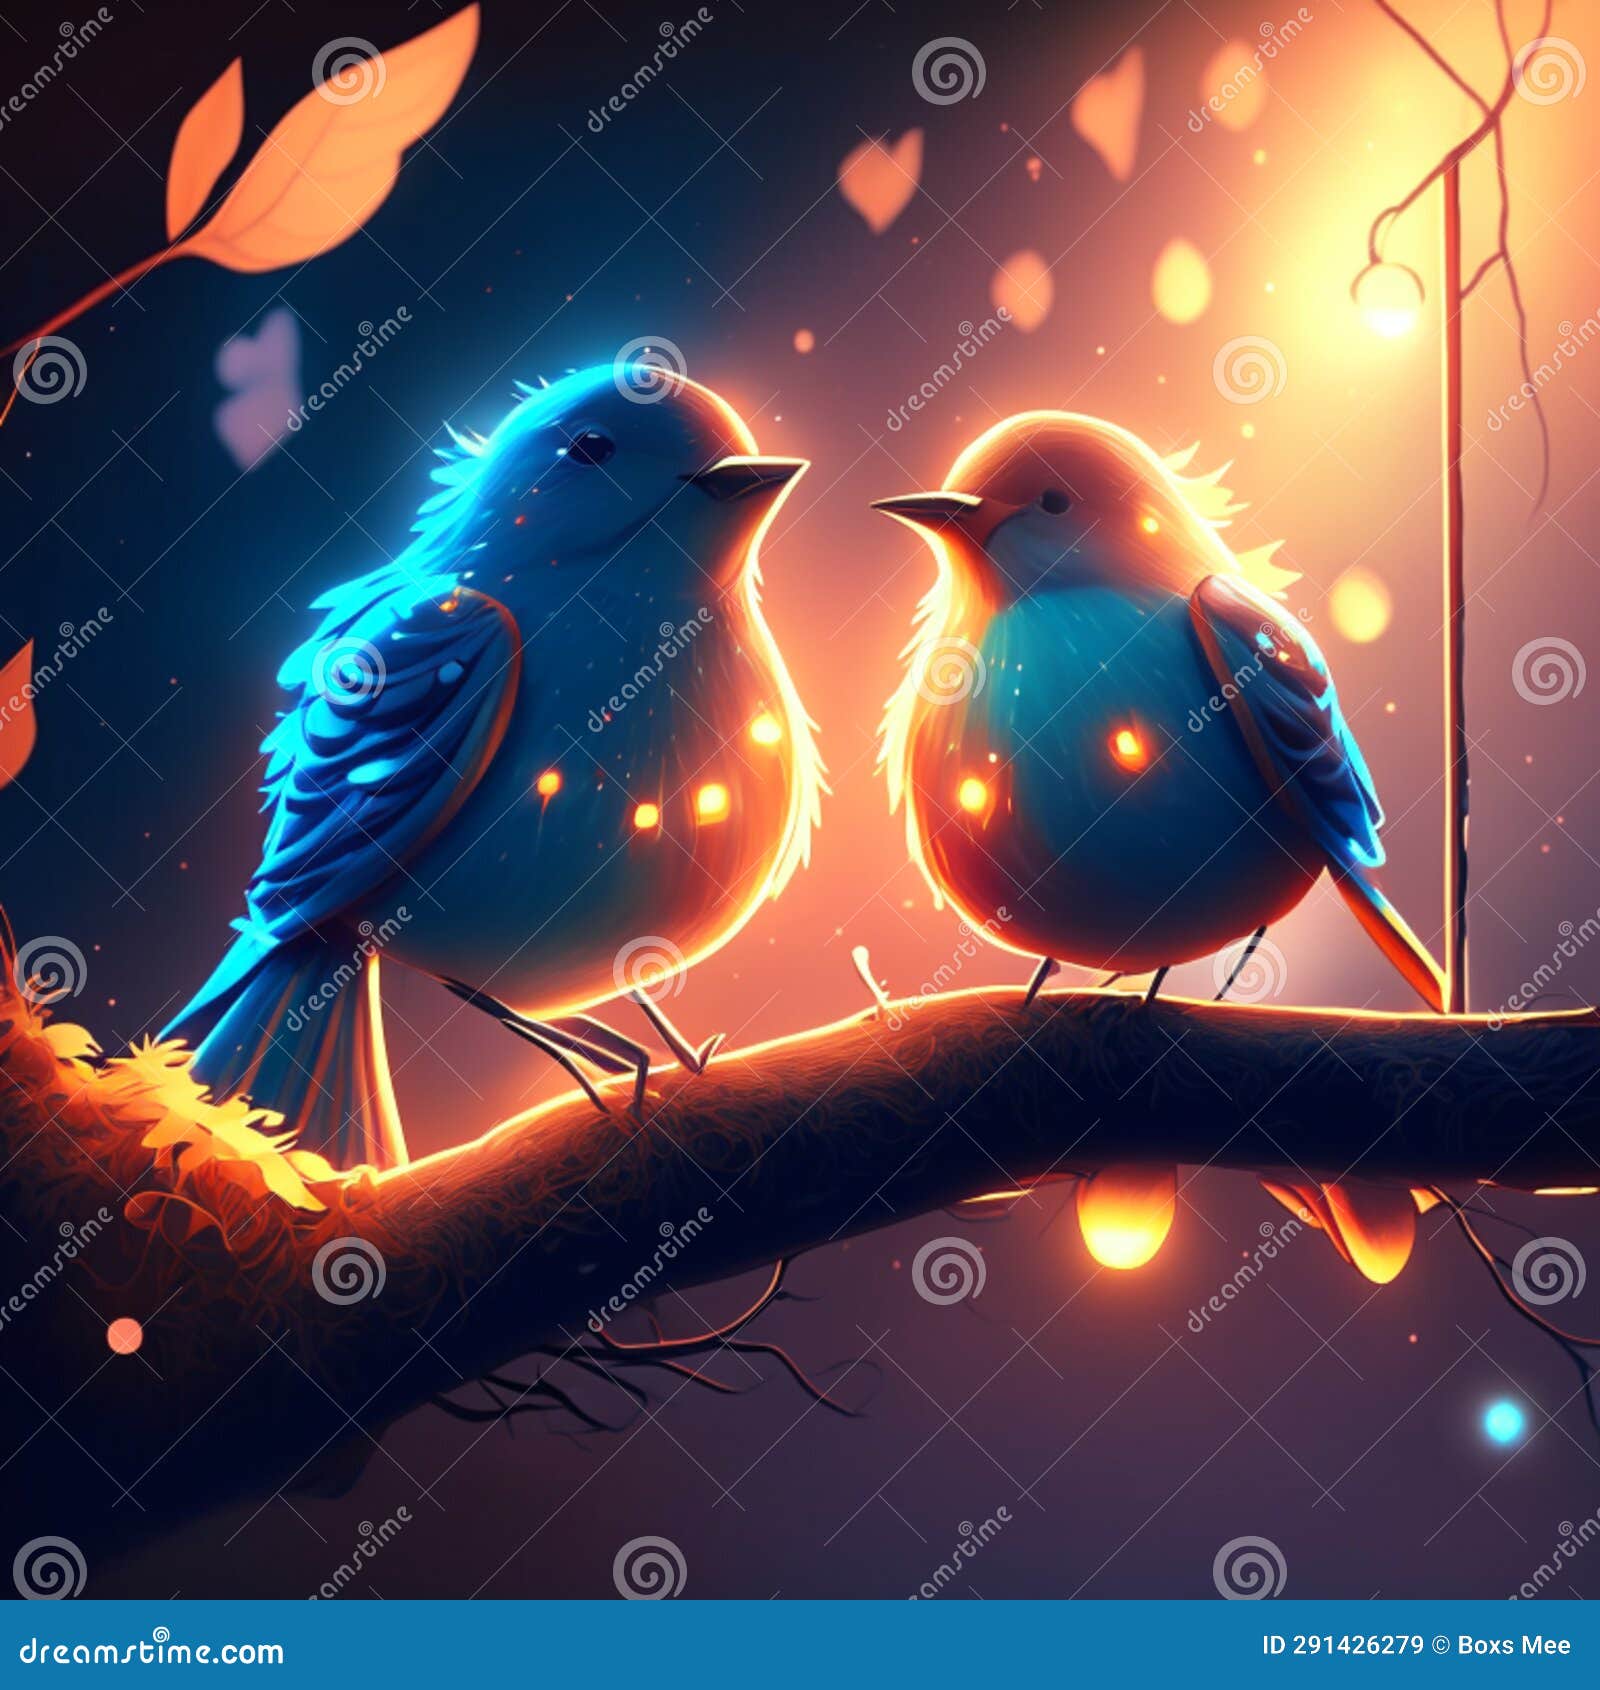 Two Blue Birds Sitting On A Branch In The Evening Vector Illustration